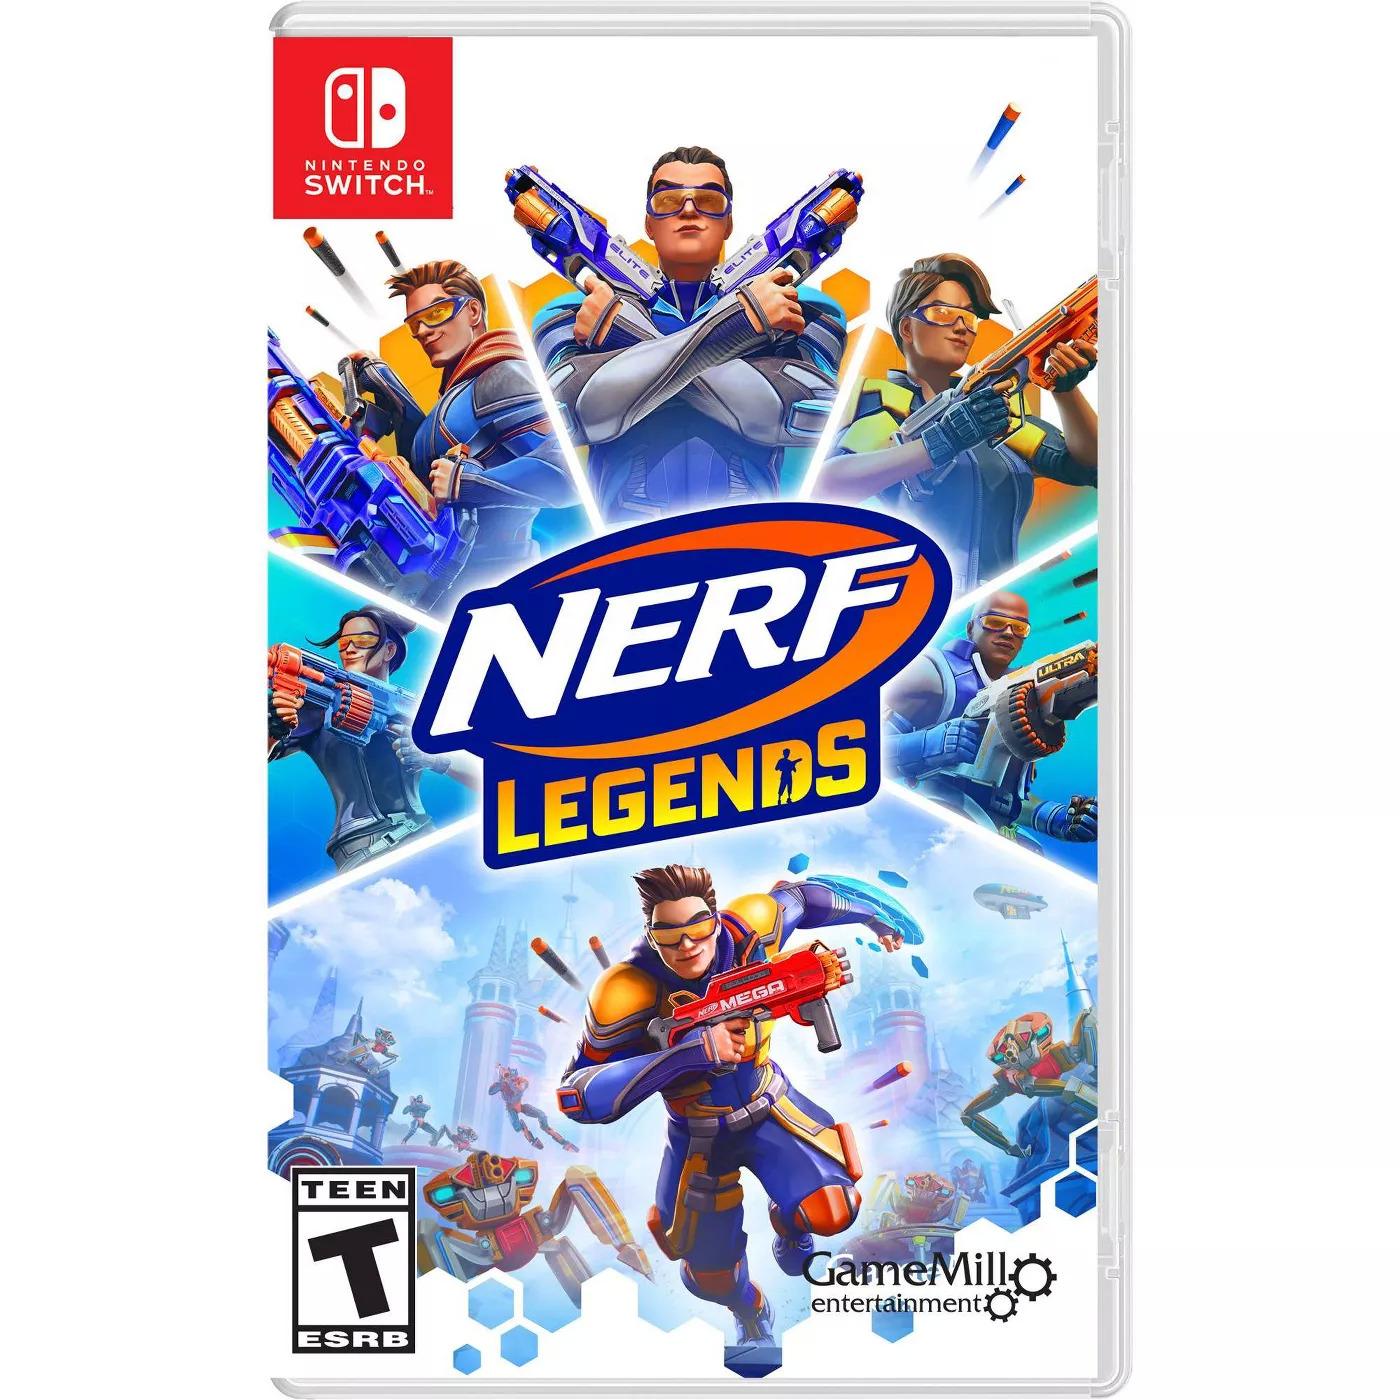 NERF Legends Video Game Nintendo Switch for $24.99